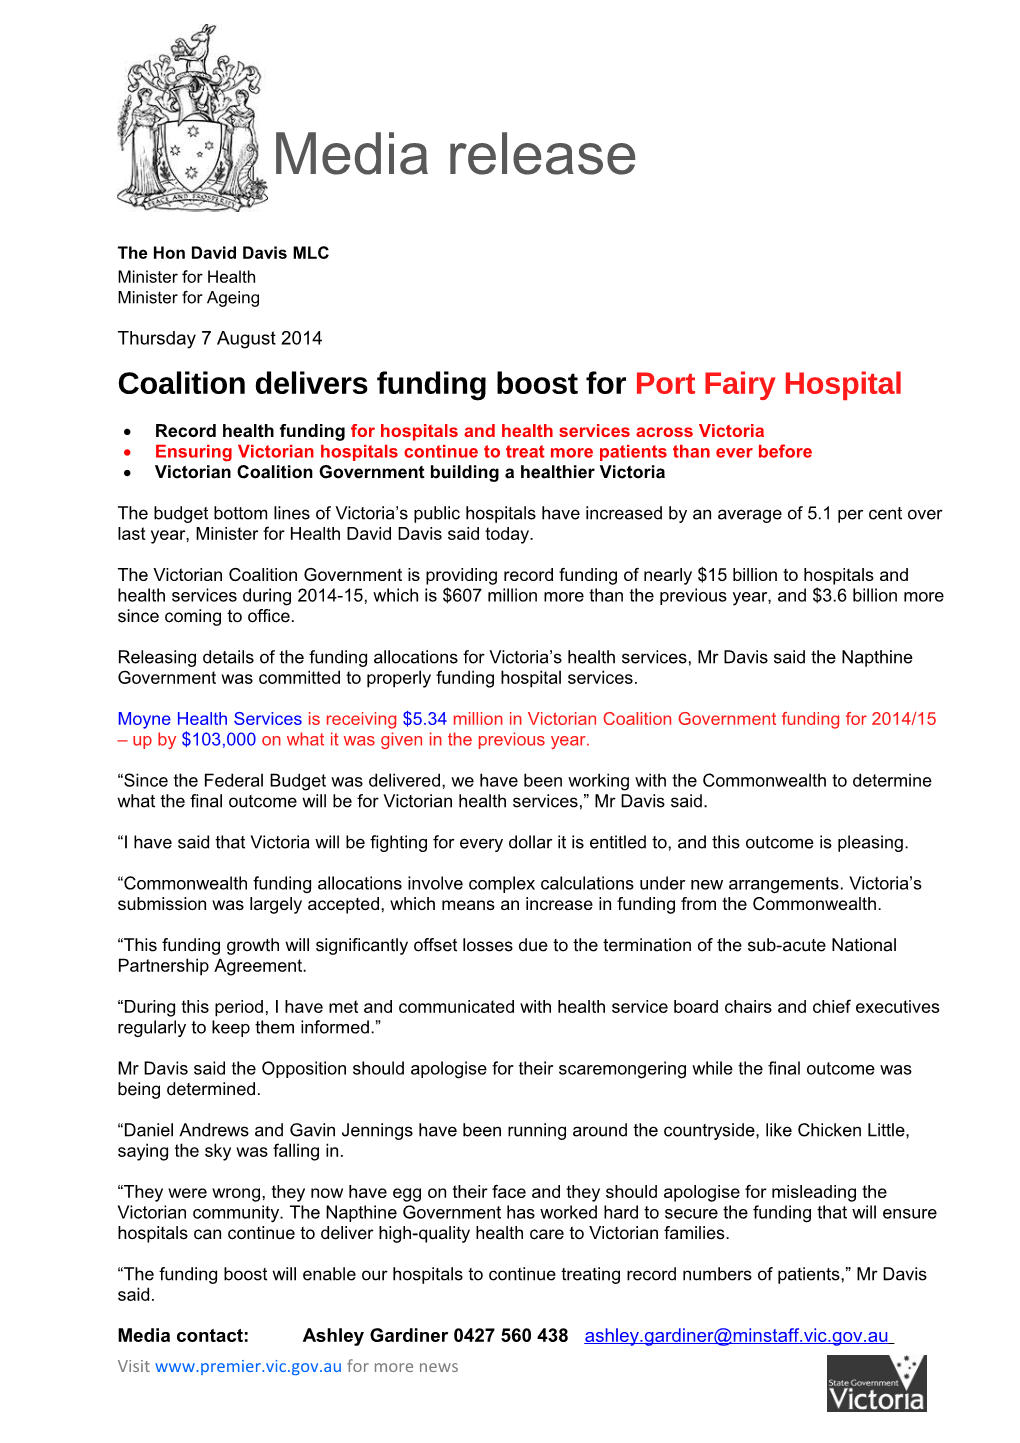 Coalition Delivers Funding Boost for Port Fairy Hospital